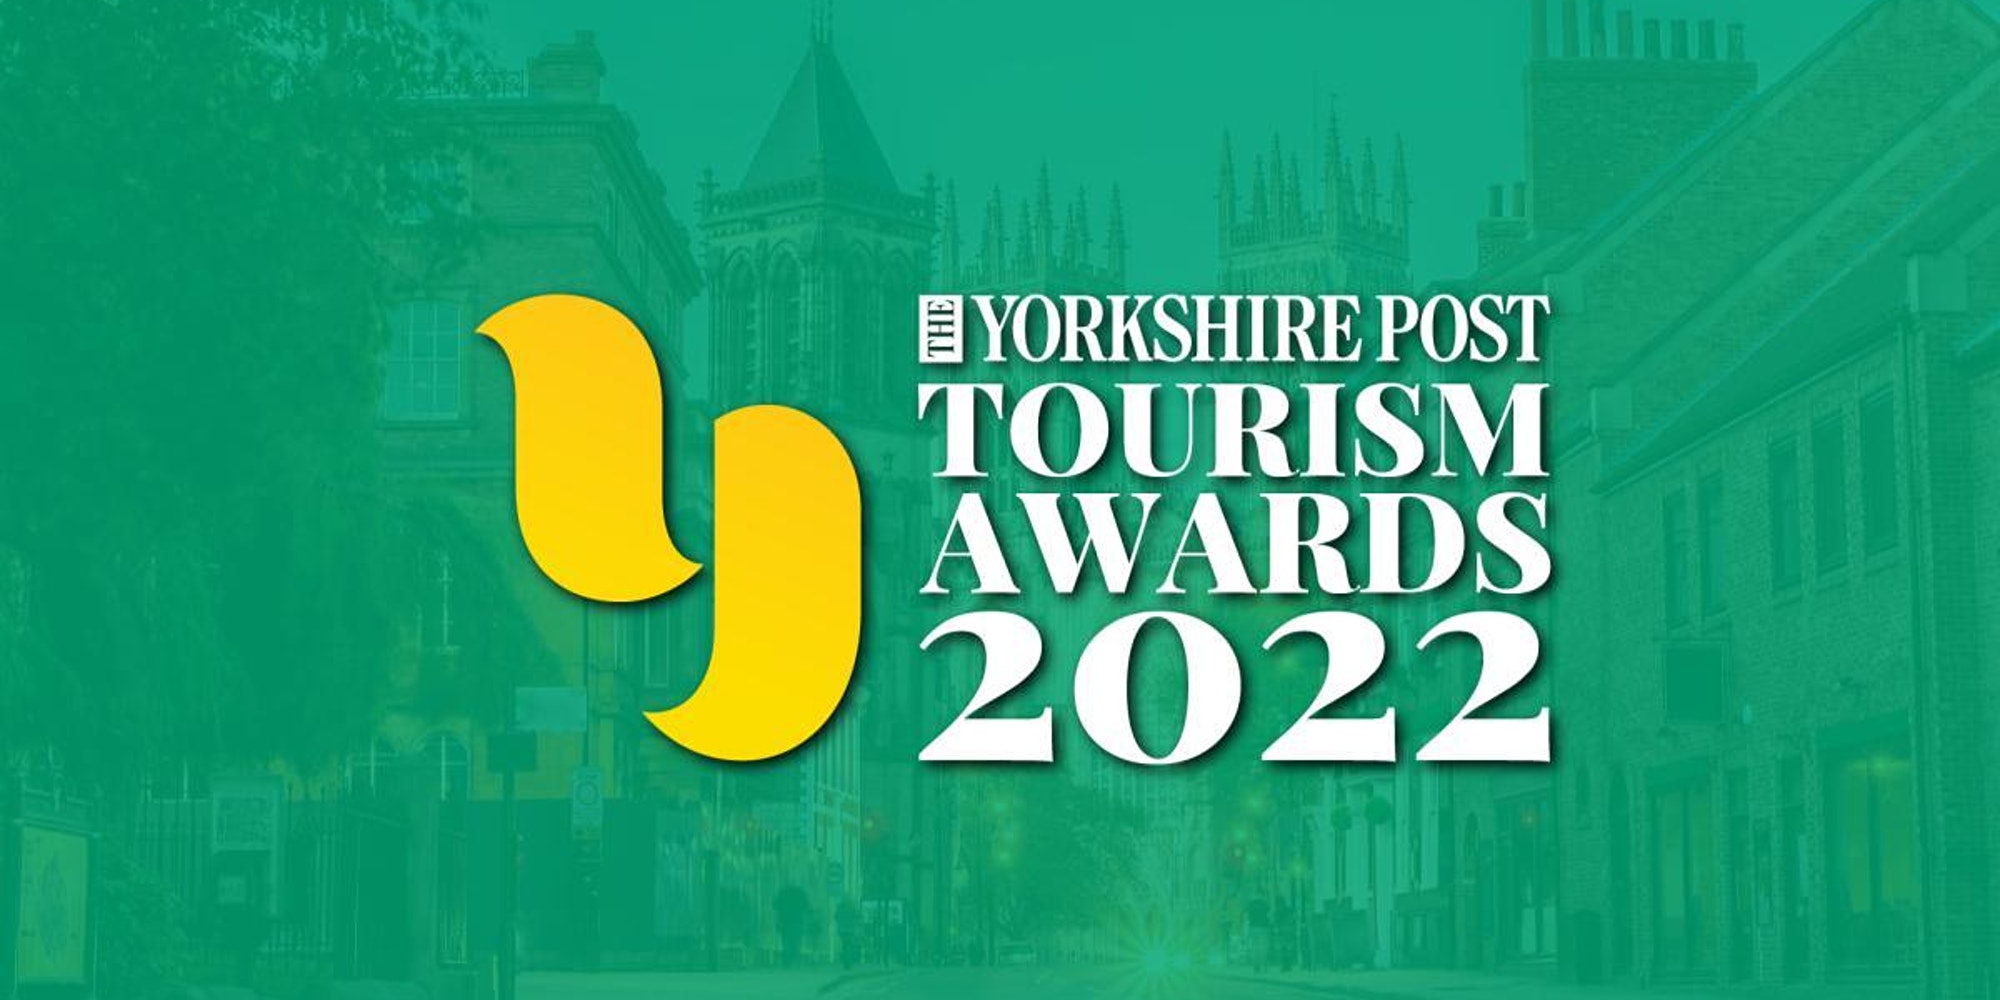 New Awards for Yorkshire Tourism